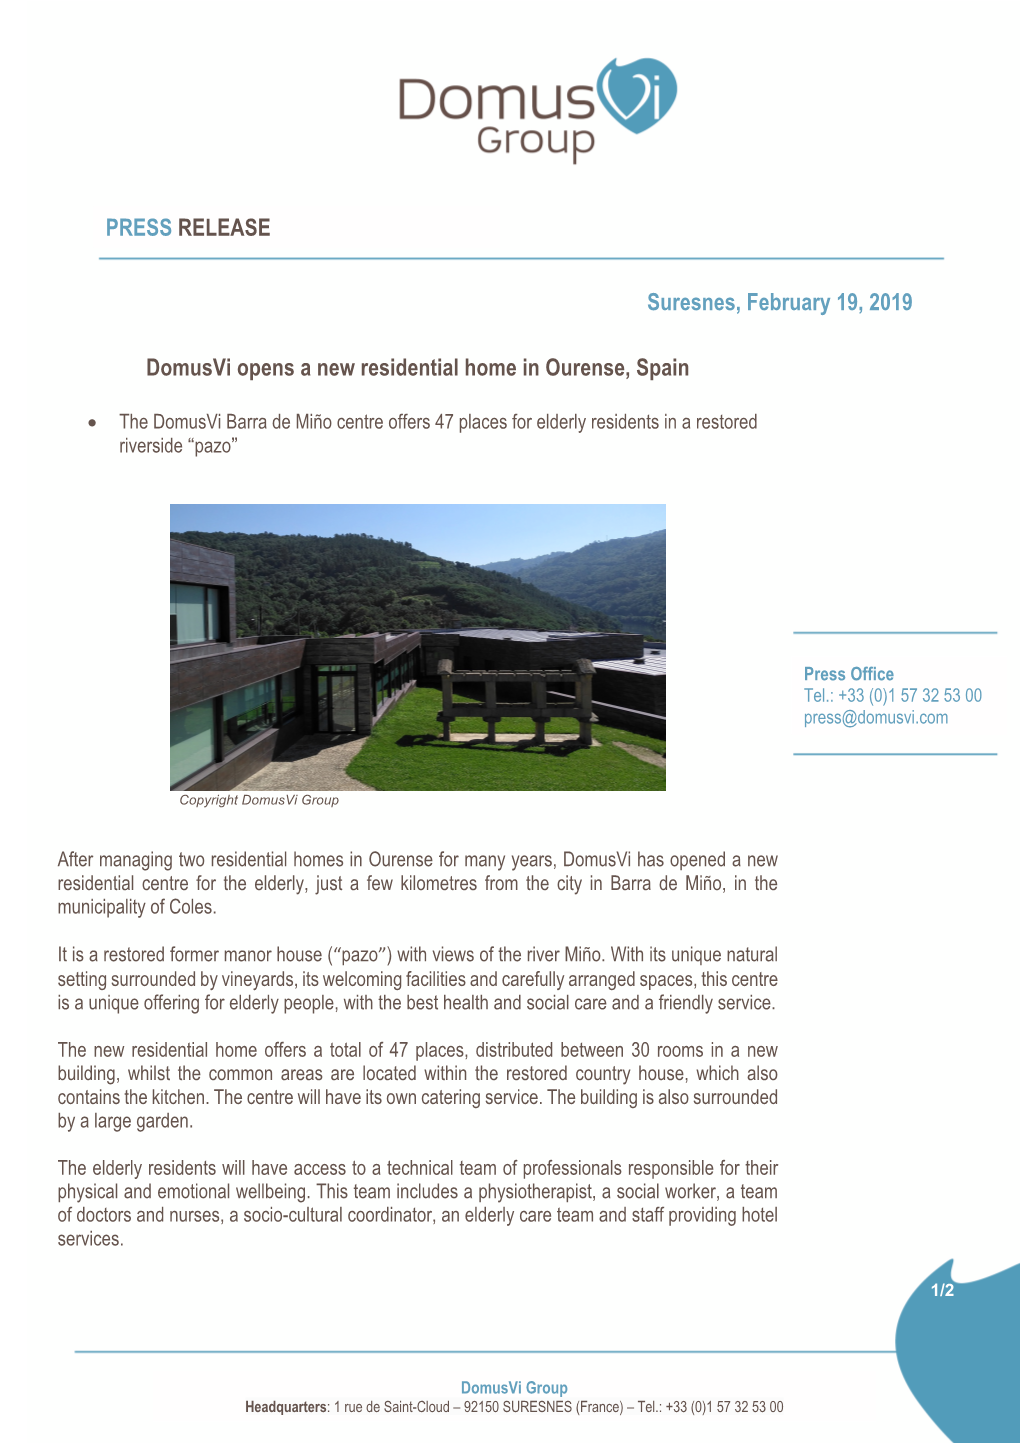 Press Release-Domusvi Opens a New Residential Home in Ourense, Spain